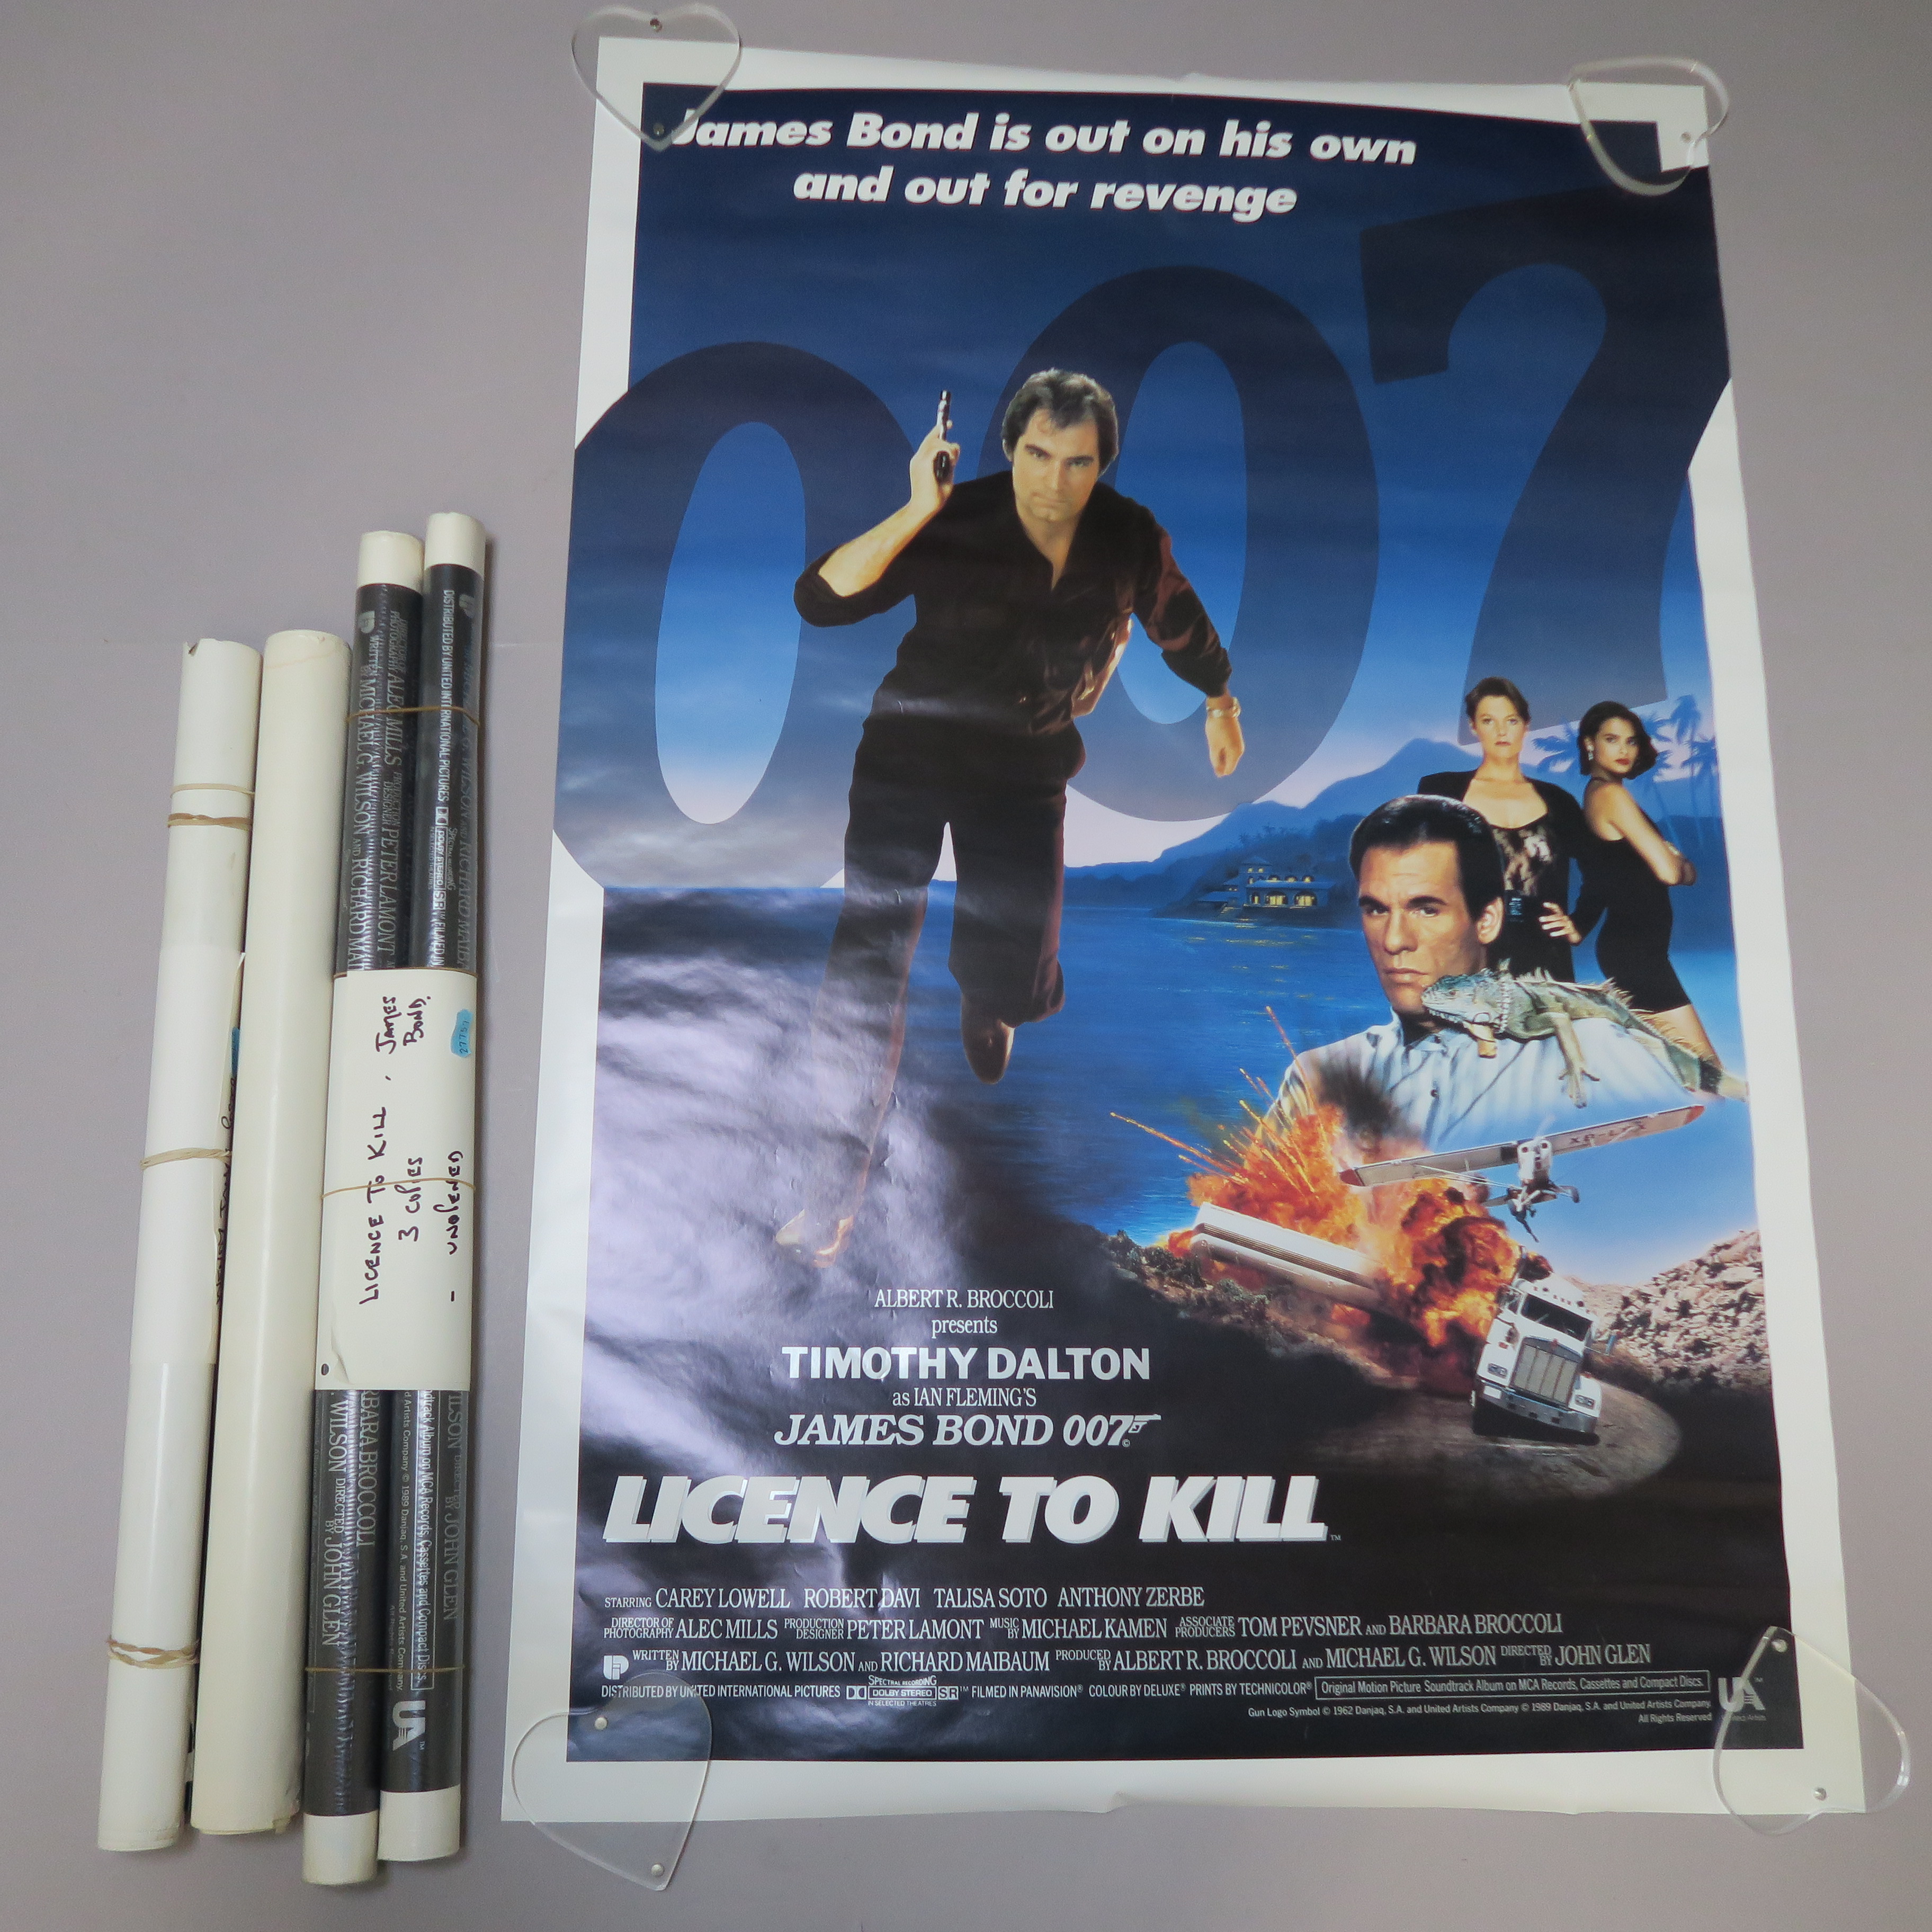 James Bond film posters including three one sheets for Licence to Kill starring Timothy Dalton in